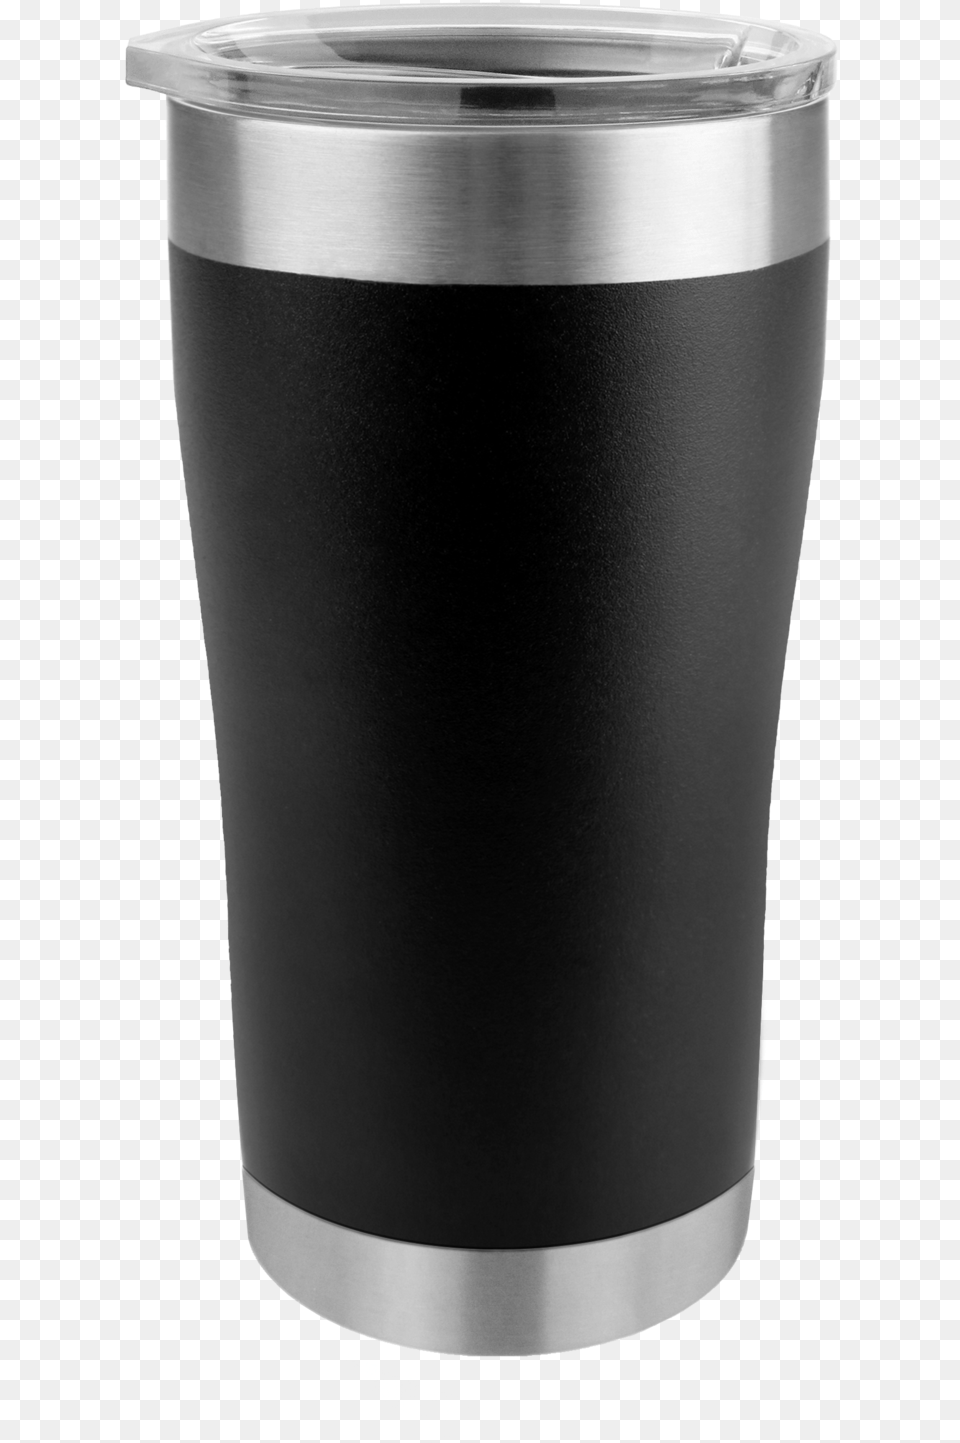 Tempercraftclass Lazyload Lazyload Fade In Cloudzoom Drinkware Black, Steel, Cup, Can, Tin Free Png